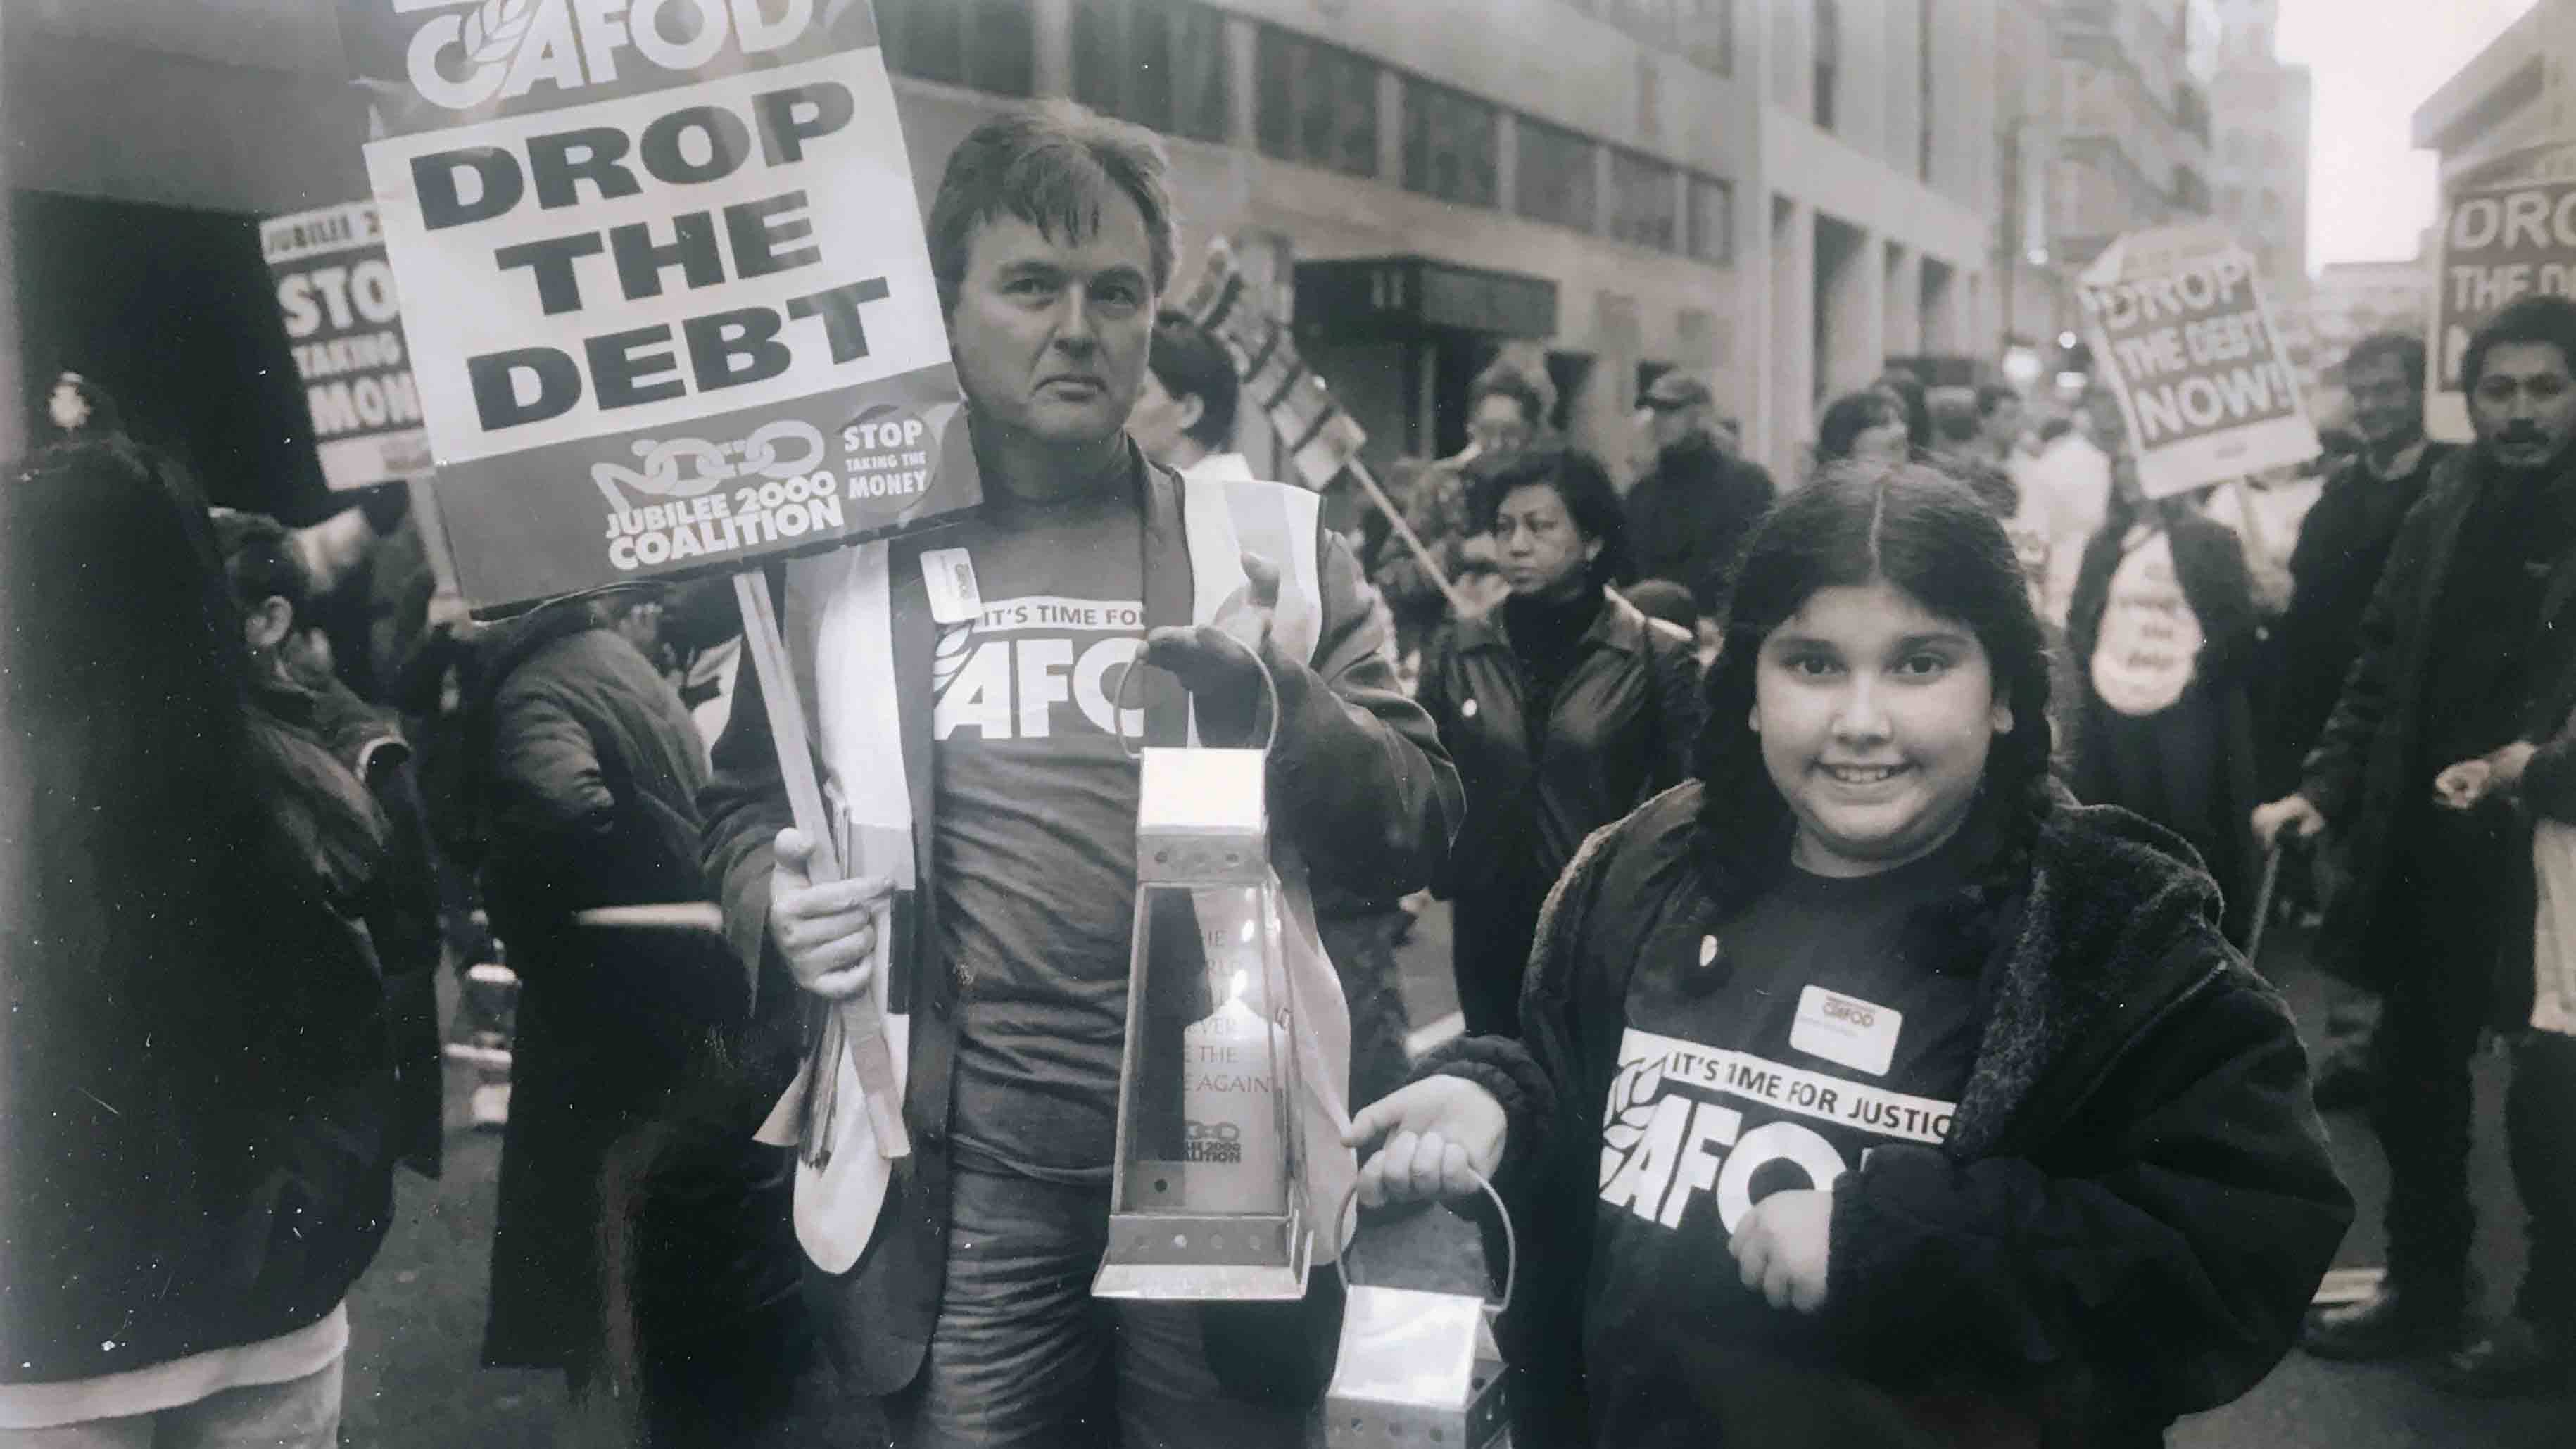 UK - Birmingham - CAFOD supporters at Drop the Debt protests in 1999